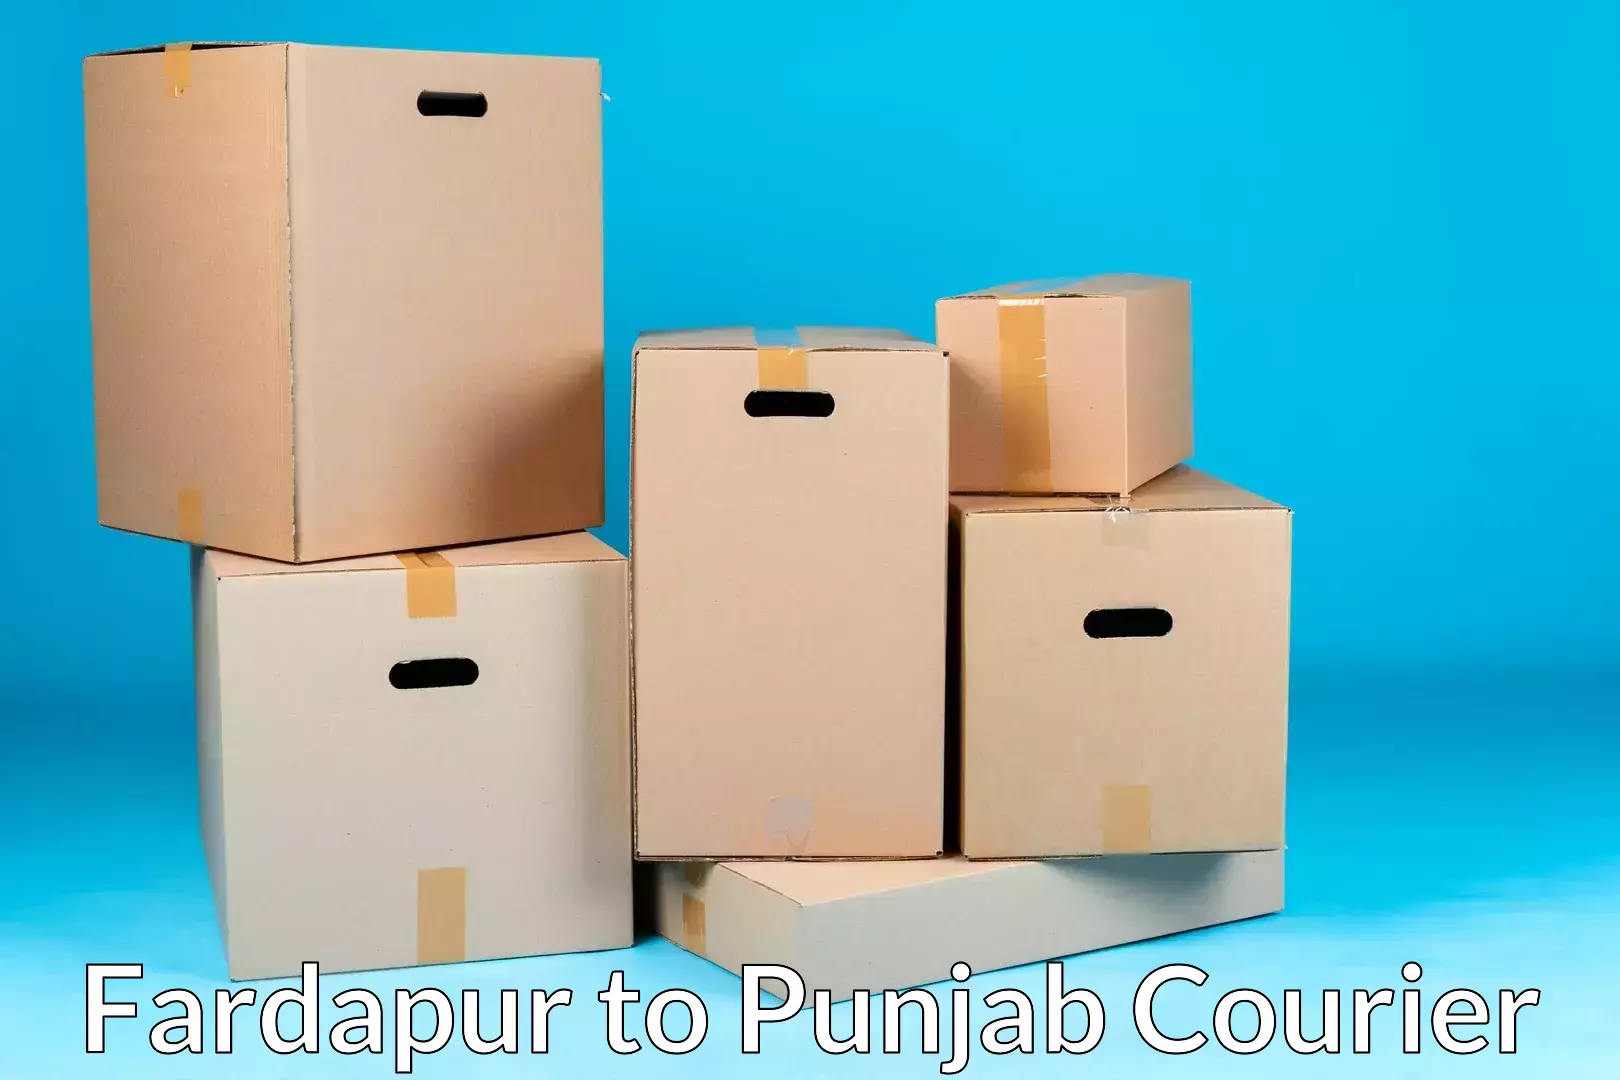 Reliable relocation services in Fardapur to Talwandi Sabo